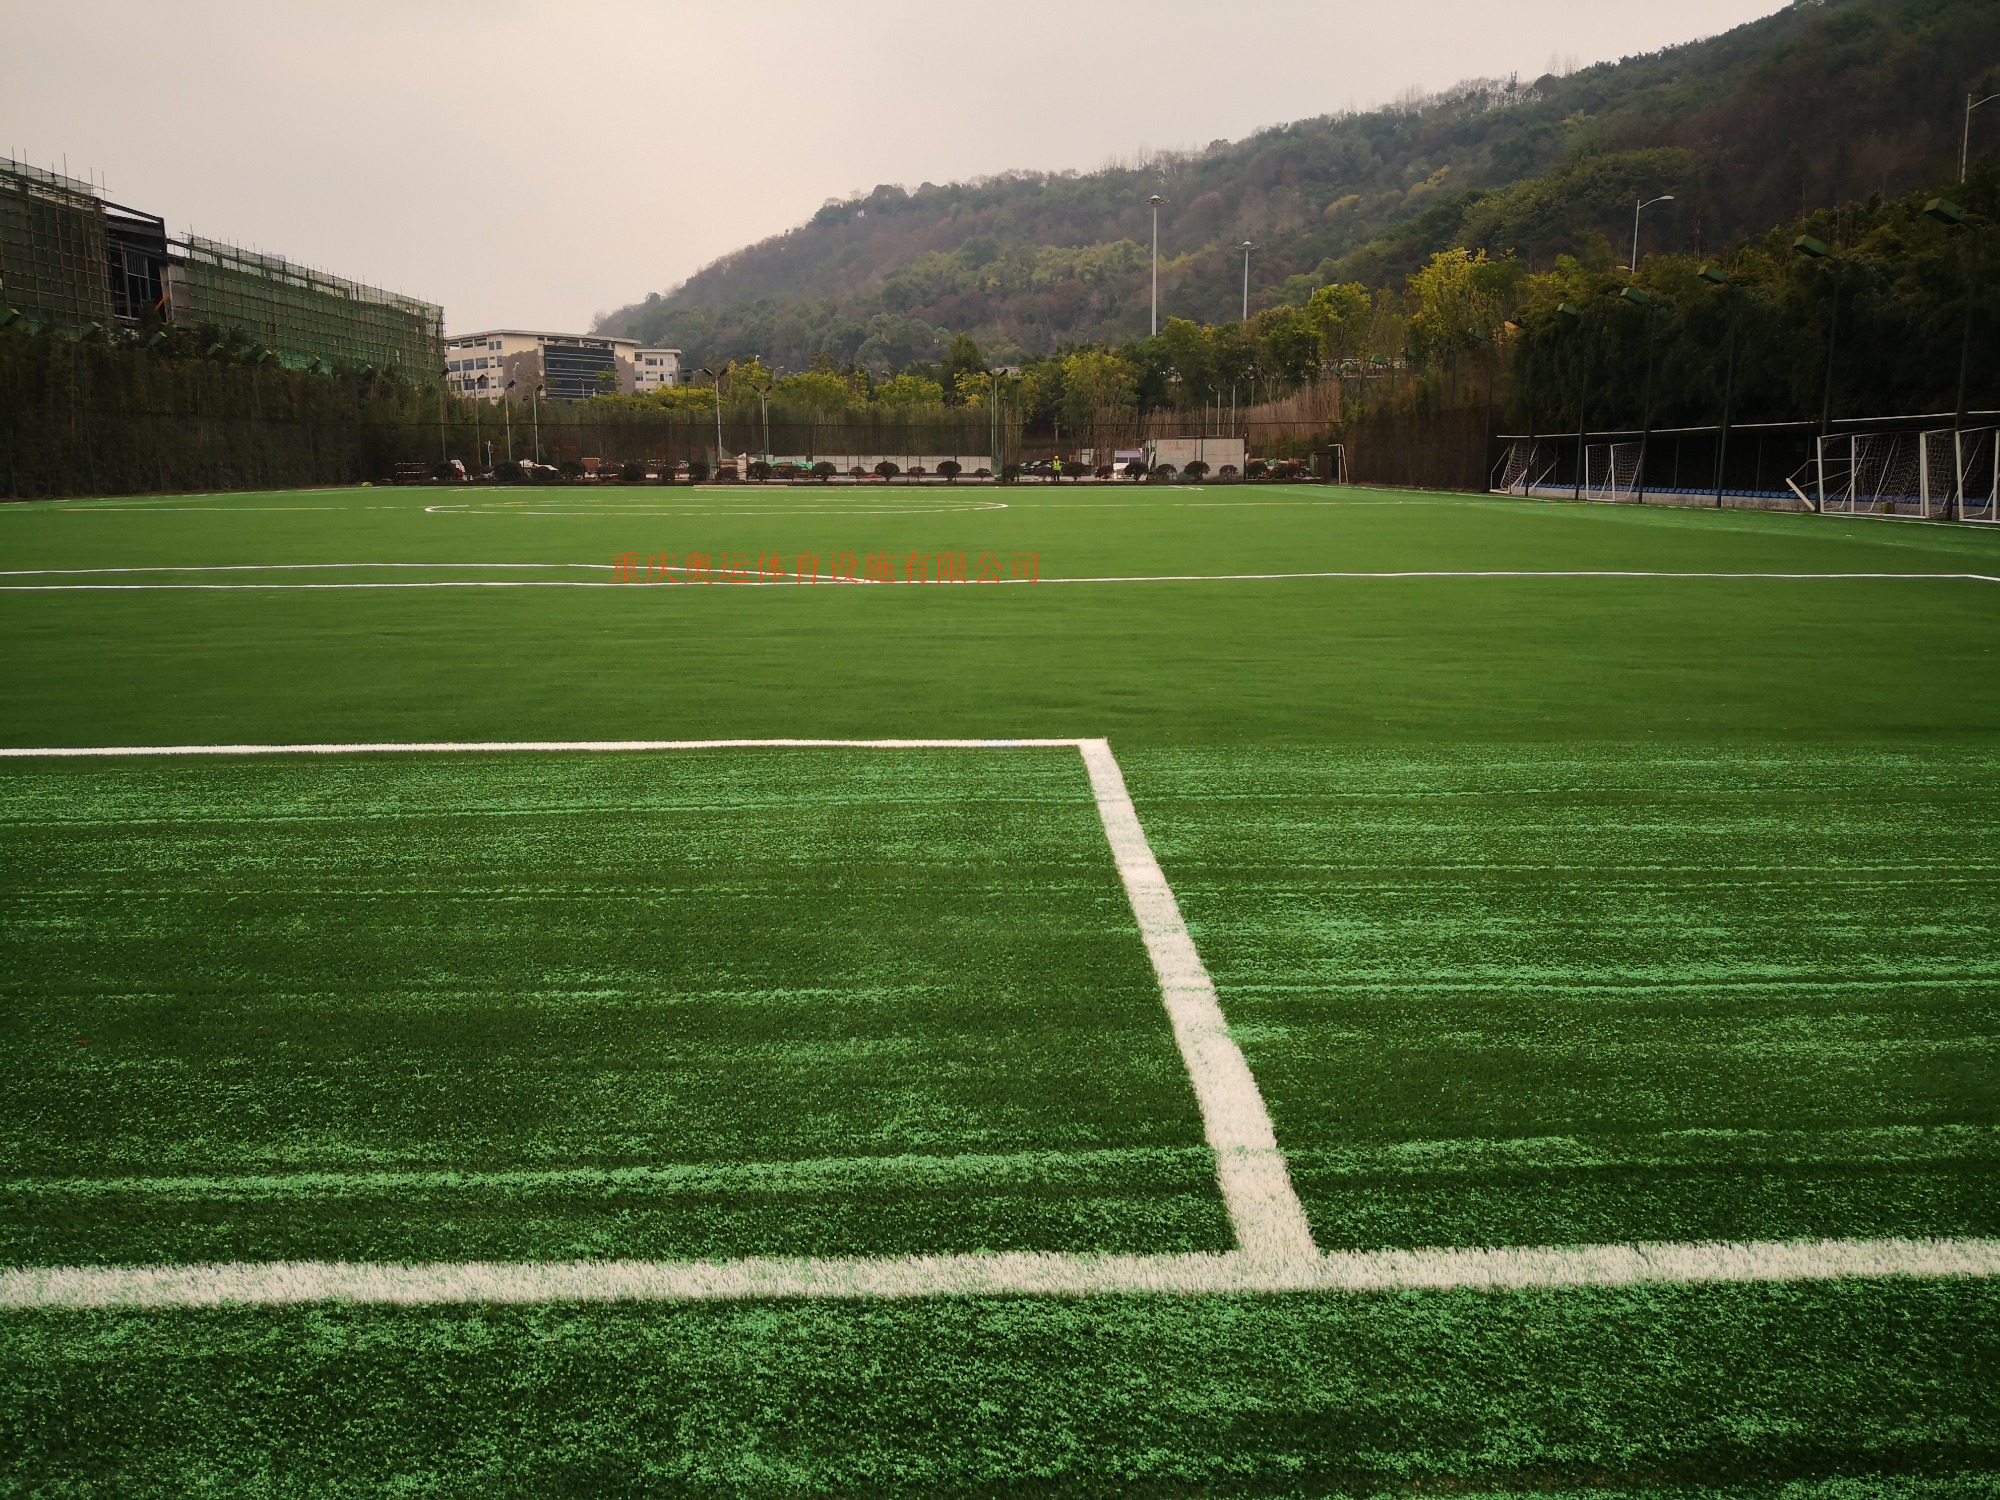 Yubei soccer stadium renovation completed